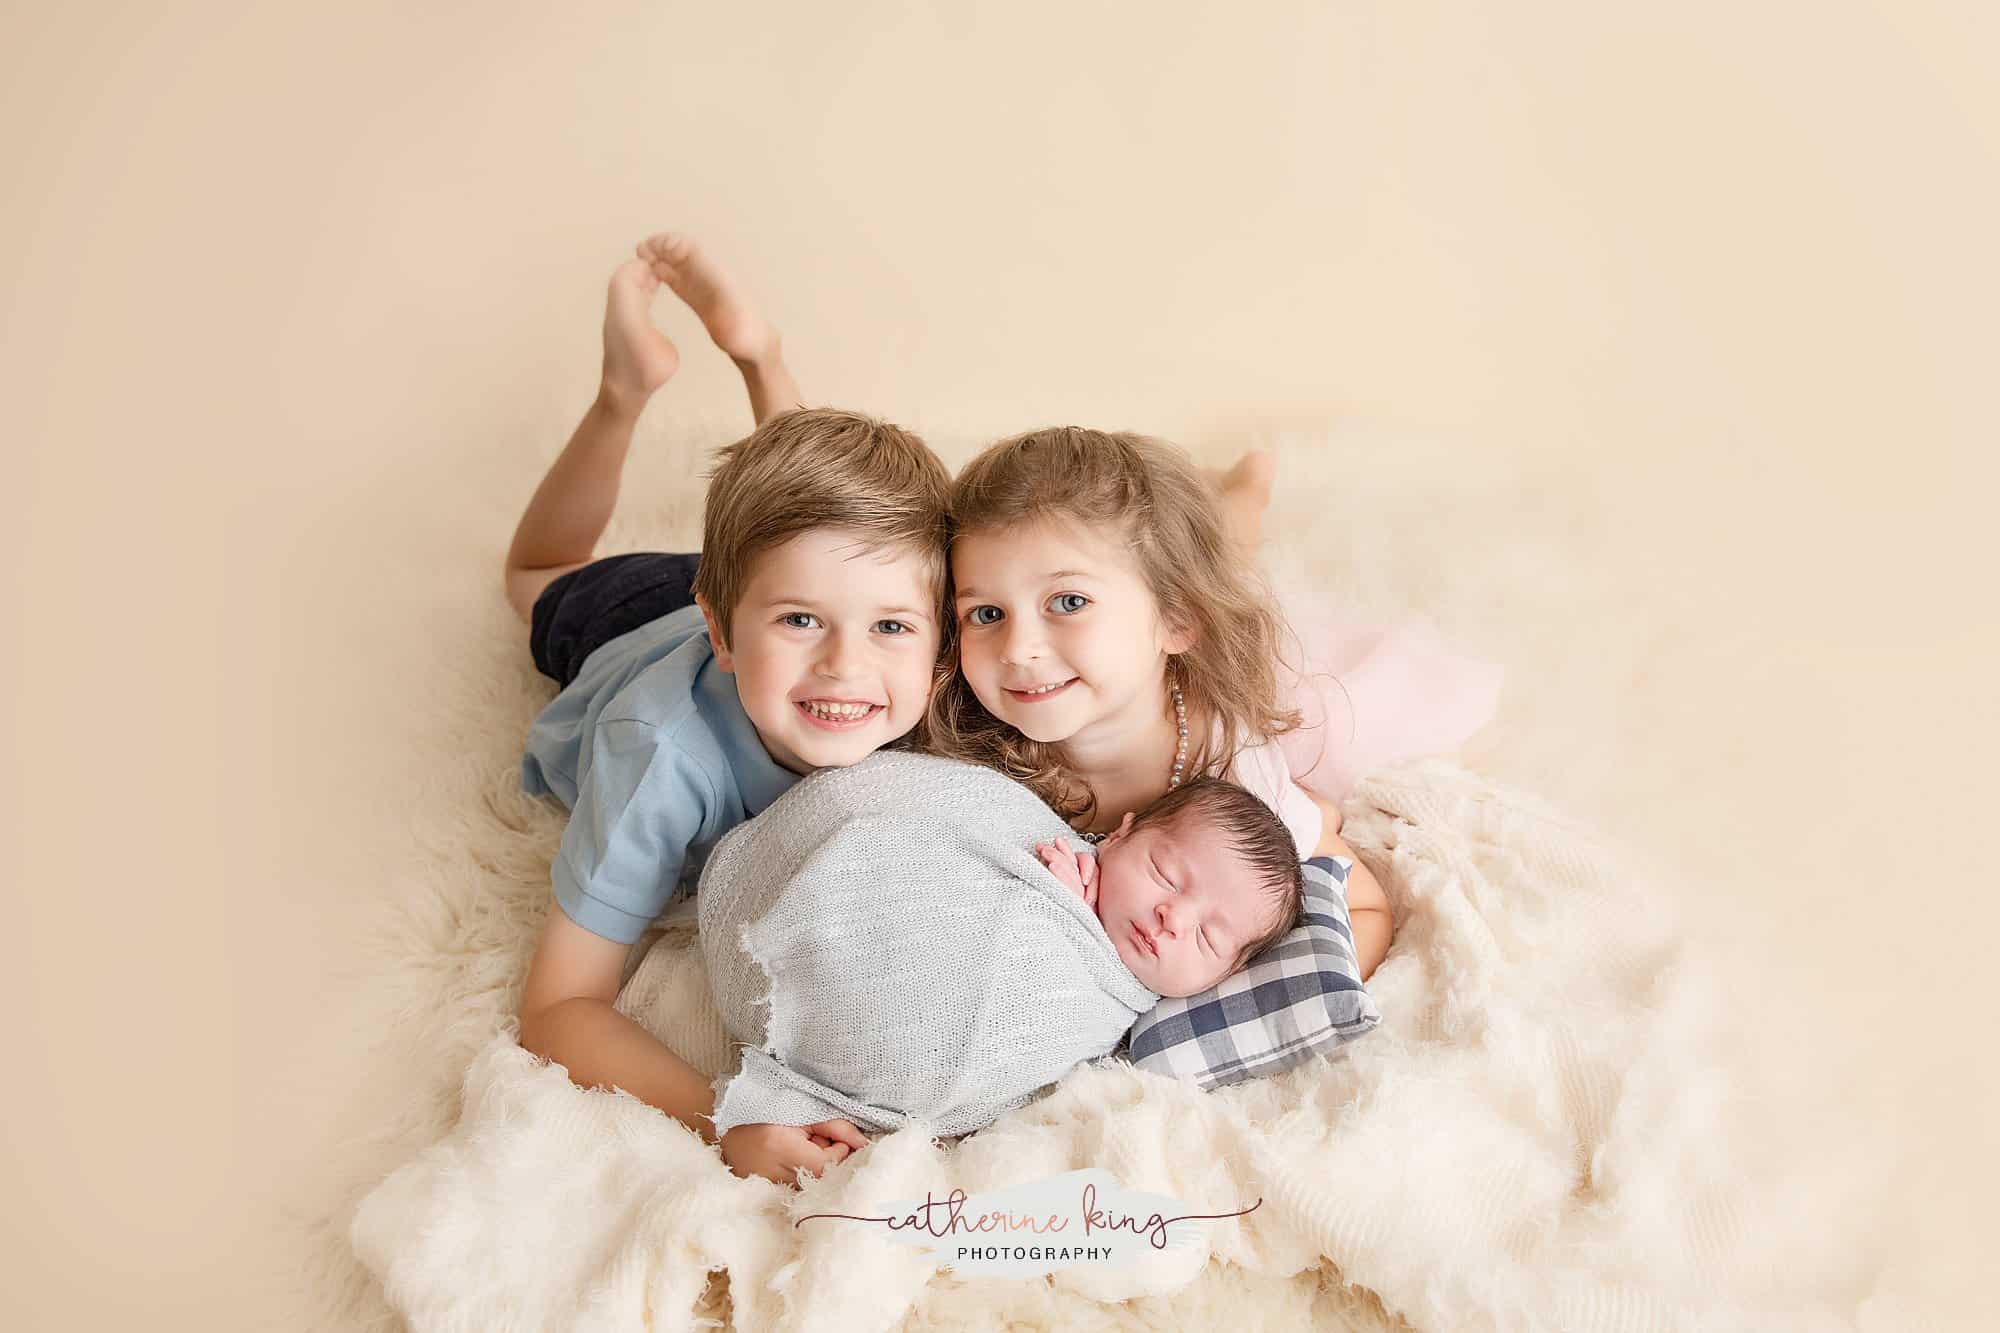 Landons newborn and family portrait photography in madison ct